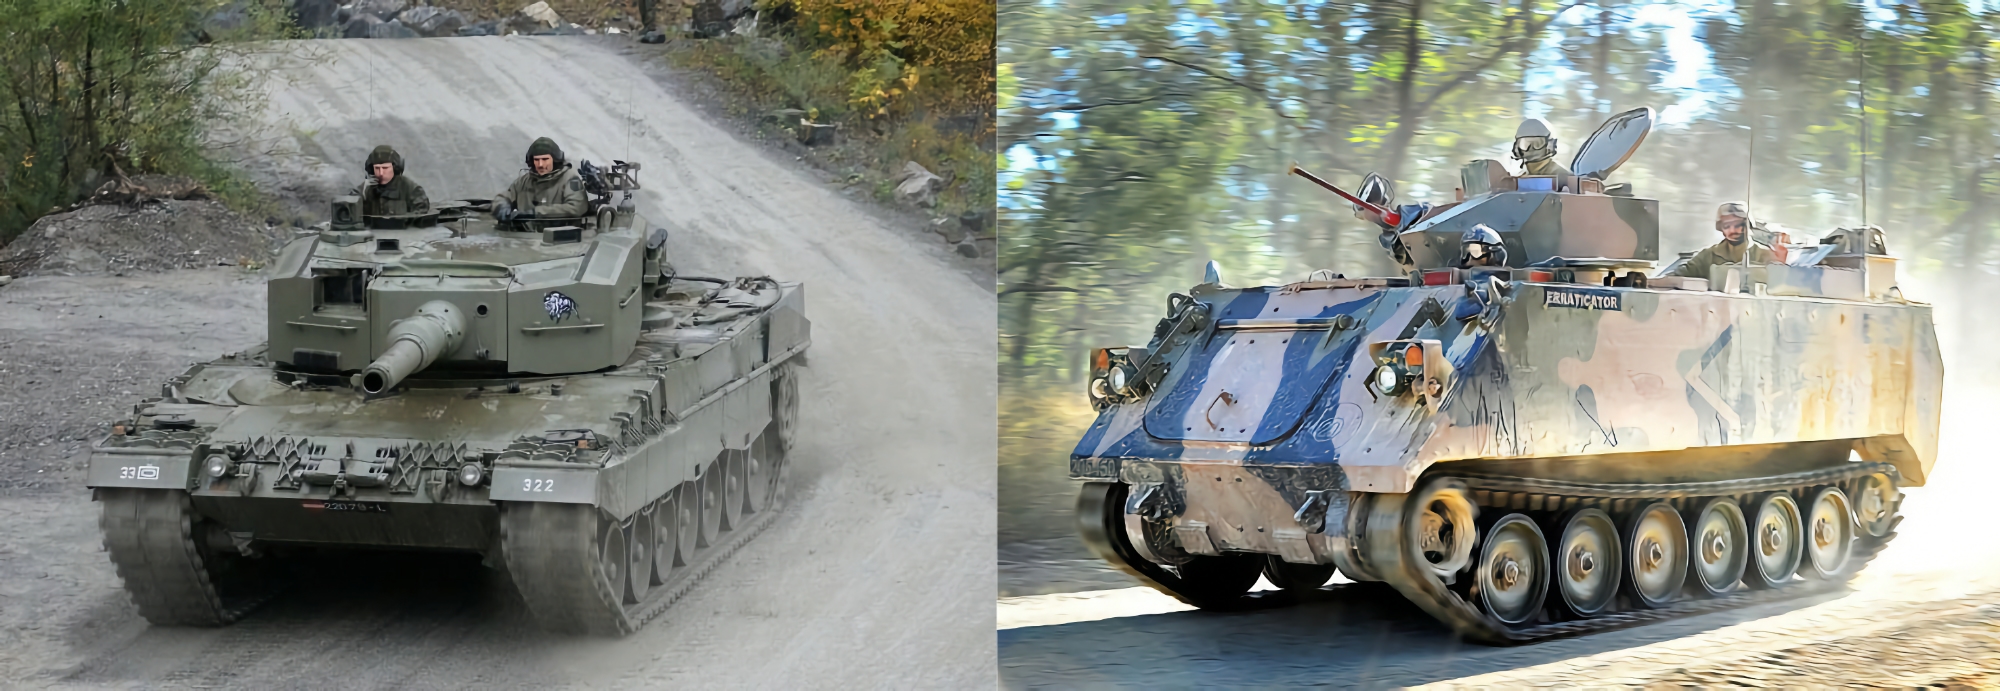 Spain begins transferring Leopard 2A4 tanks and M113 armoured personnel carriers to Ukraine